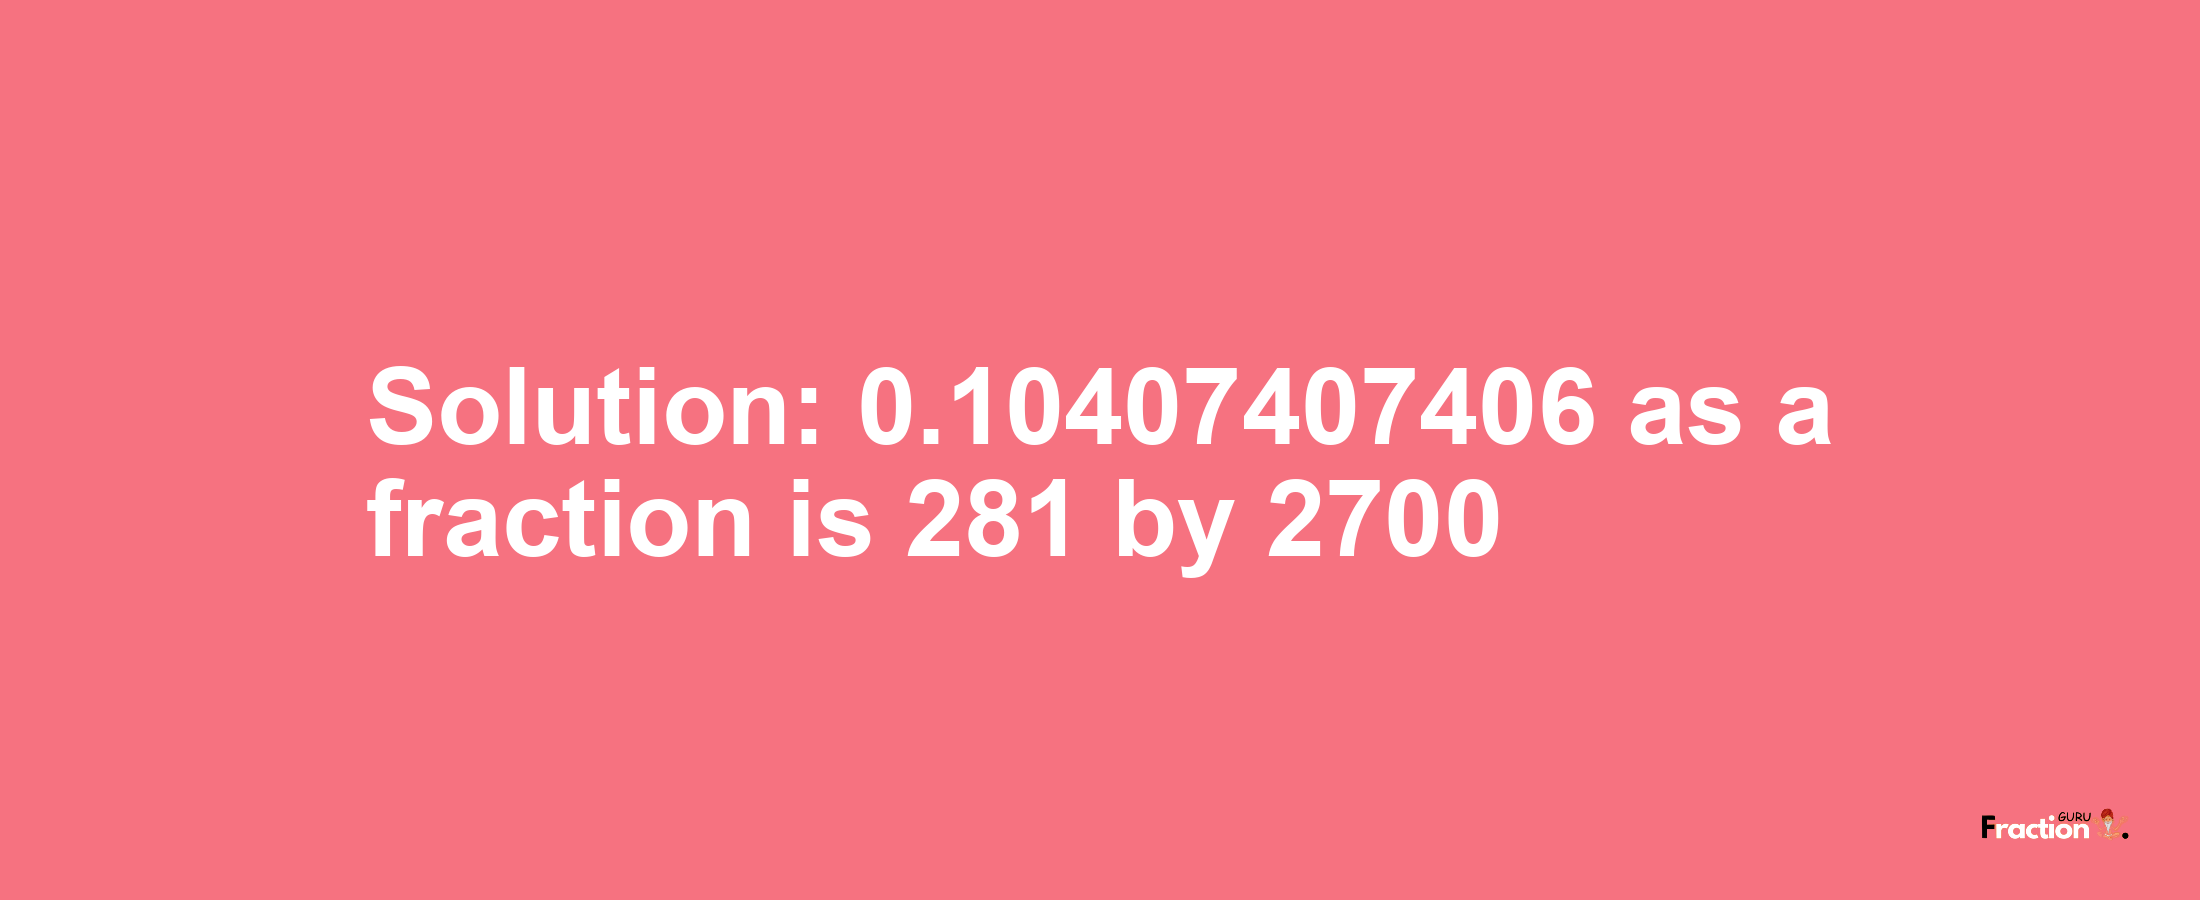 Solution:0.10407407406 as a fraction is 281/2700